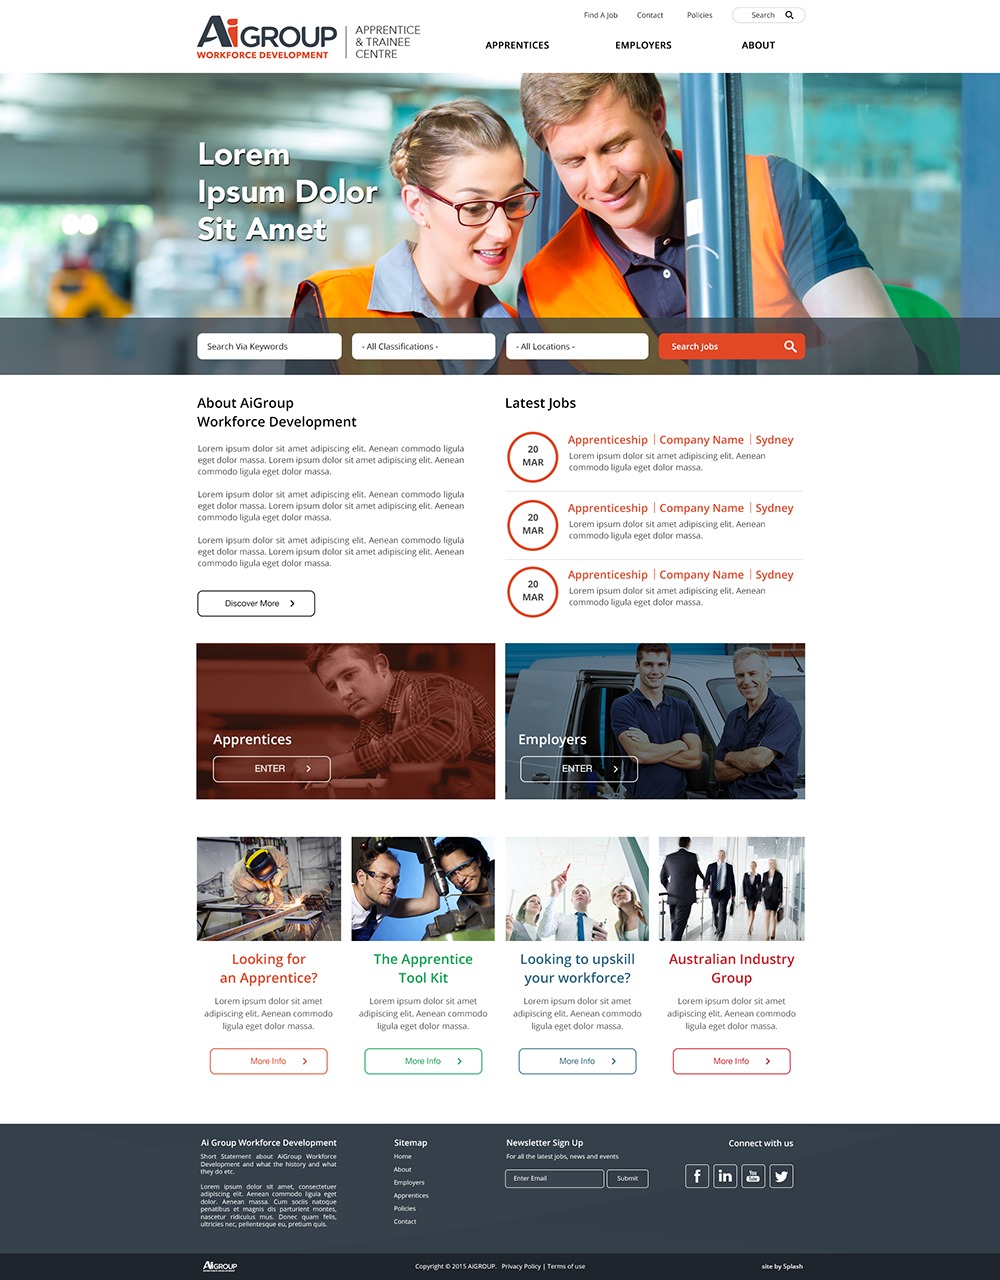 wordpress-theme-crystal-clear-adapted-from-respare-dwb4k-o.jpg